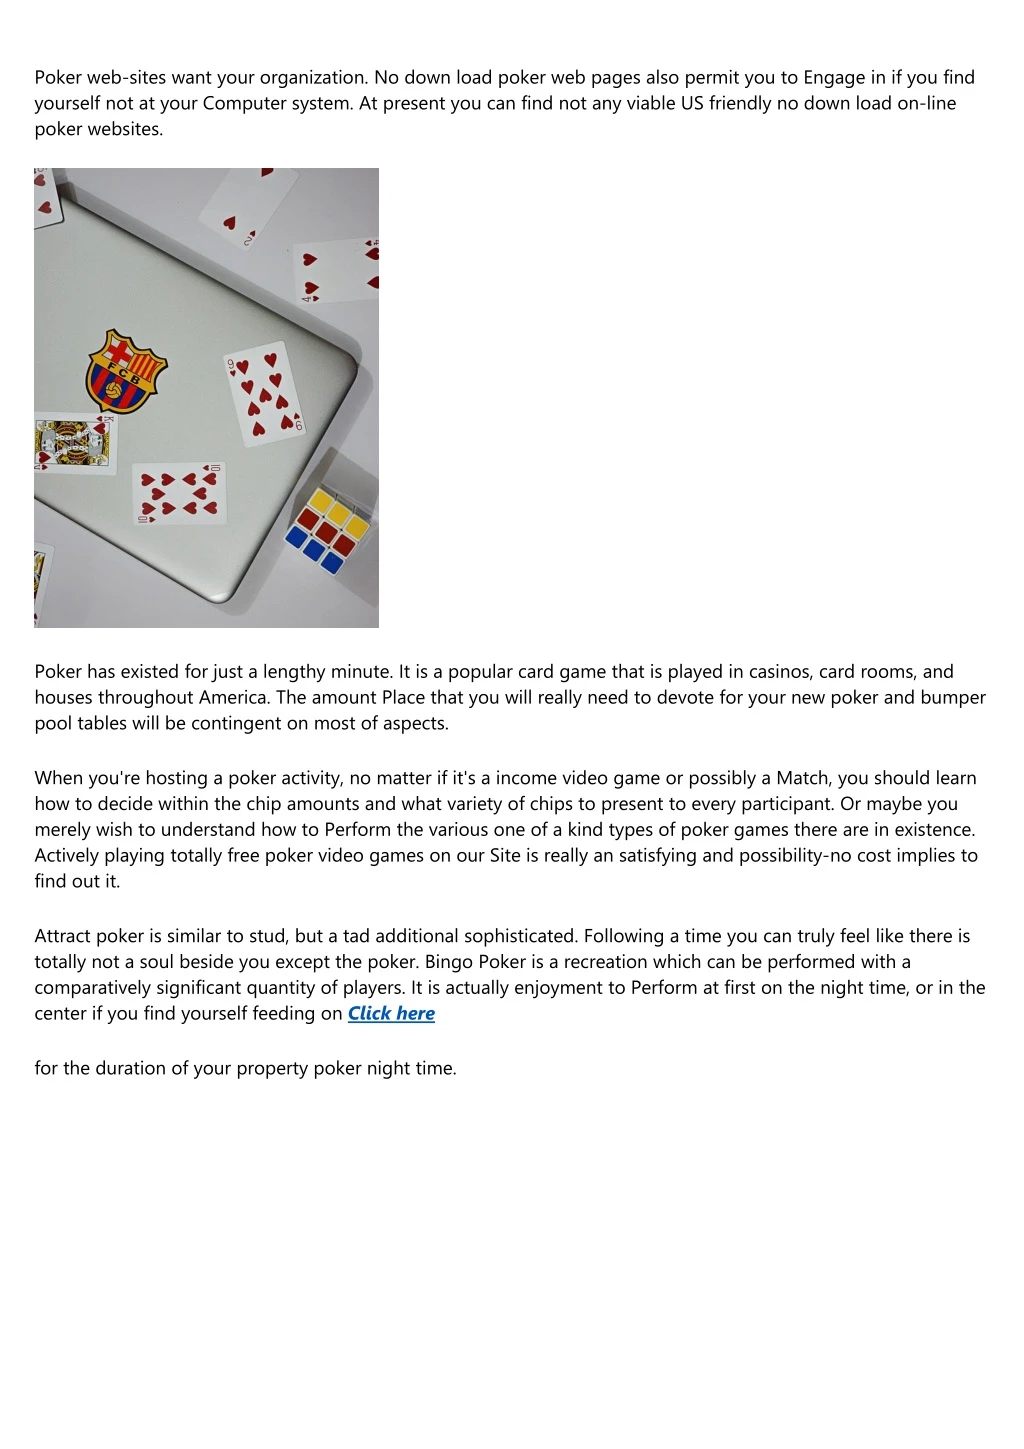 poker web sites want your organization no down